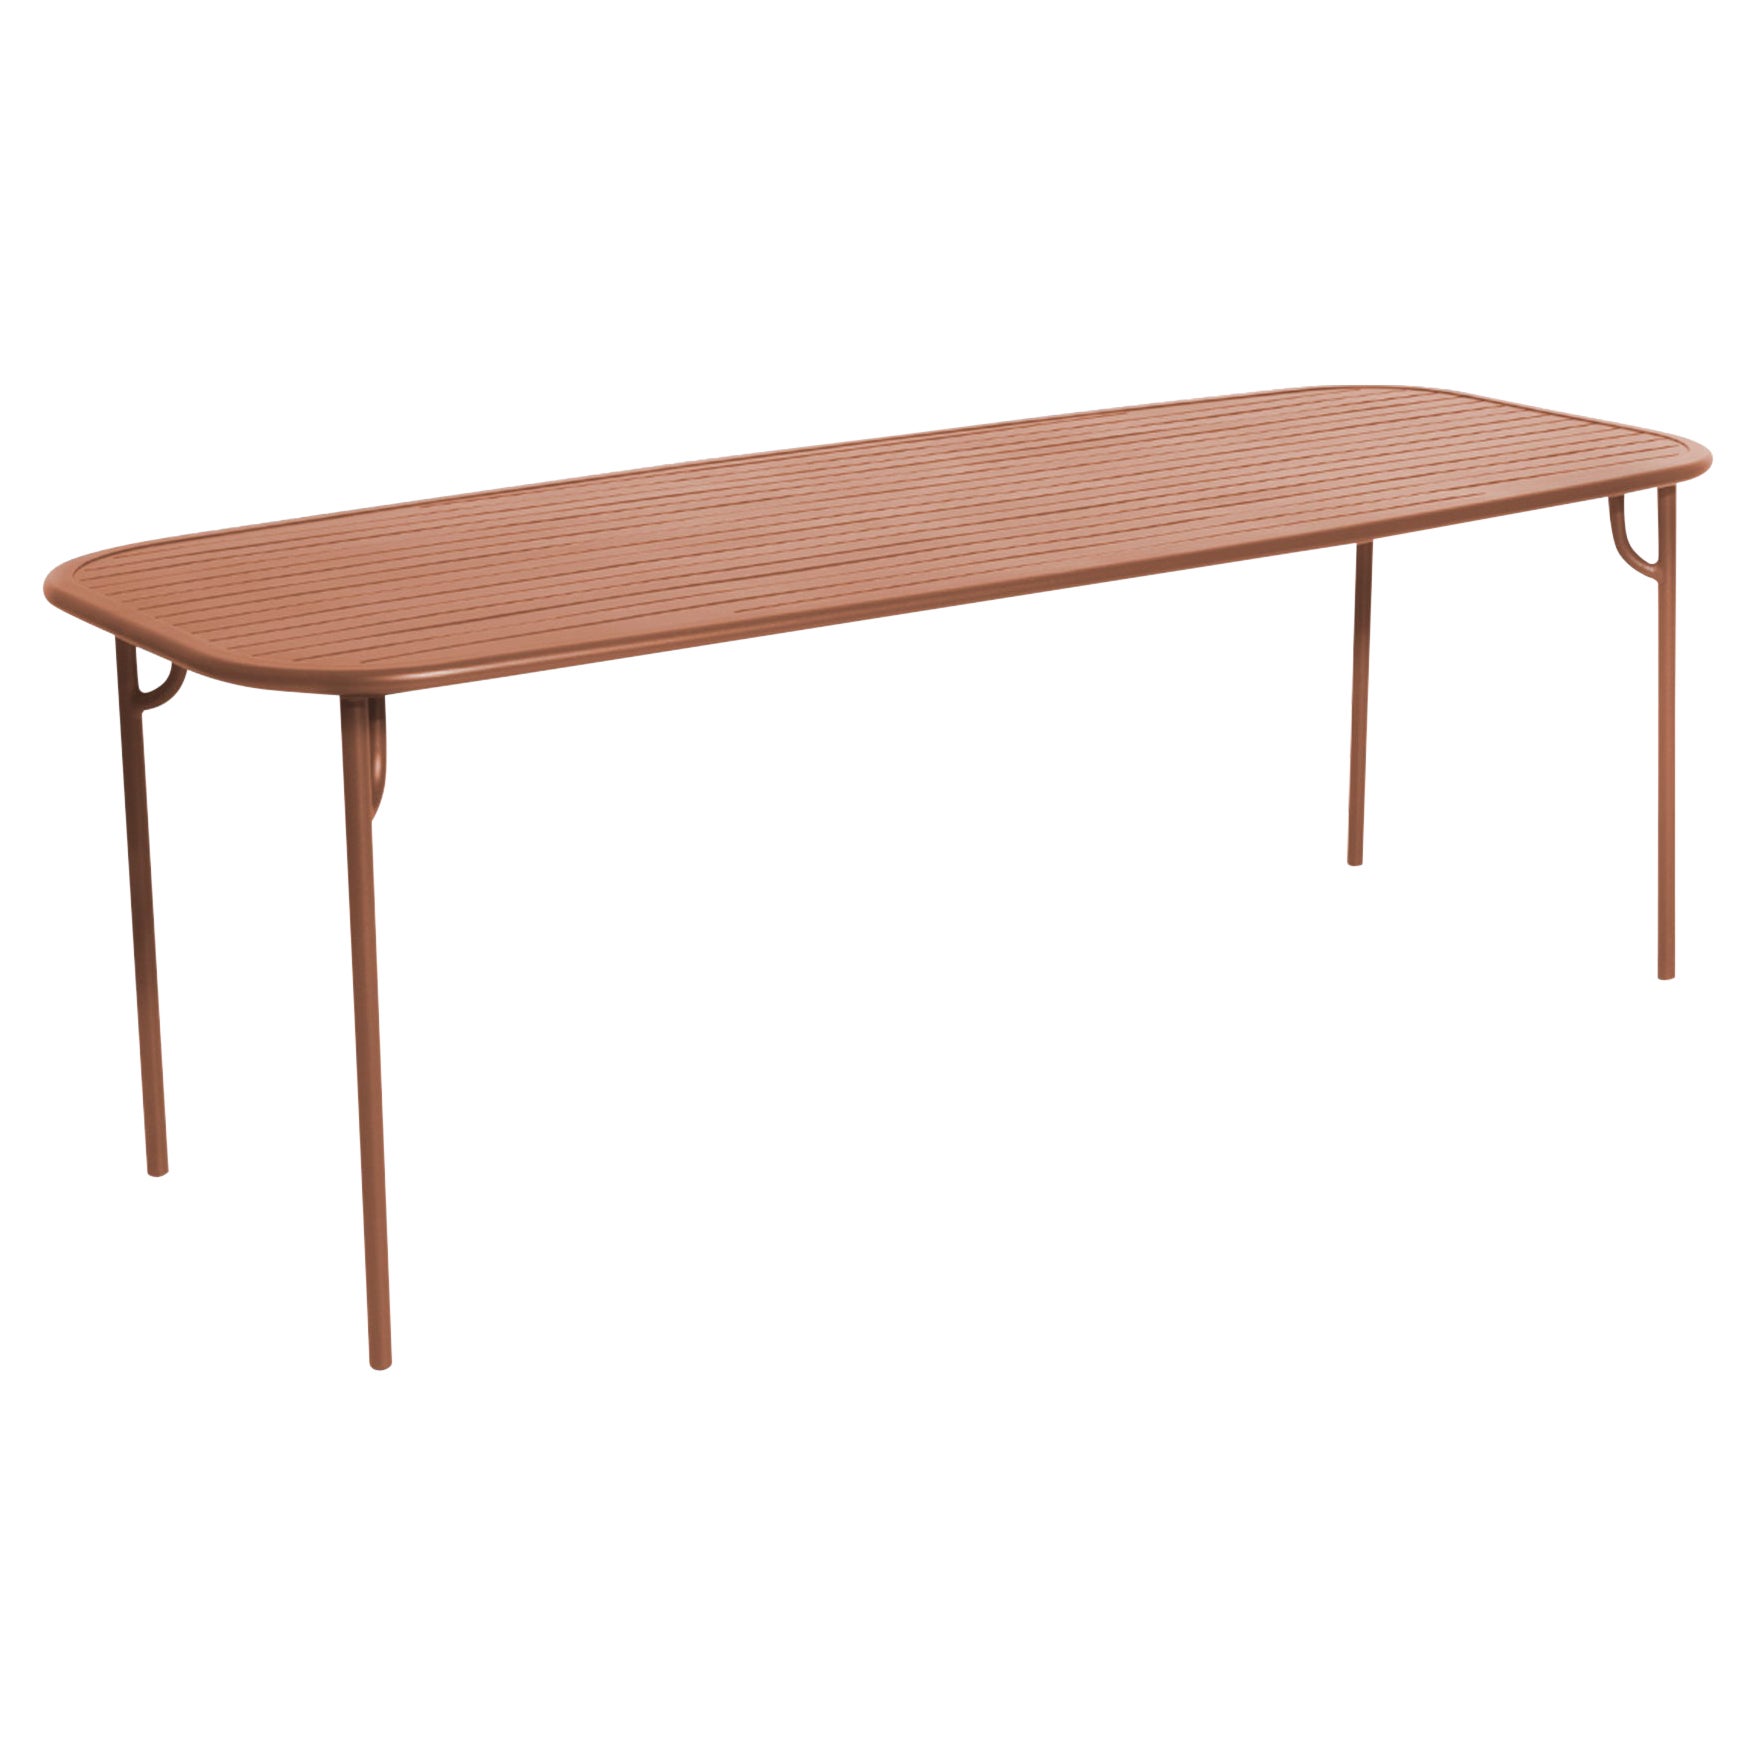 Petite Friture Week-End Large Rectangular Dining Table in Terracotta with Slats For Sale